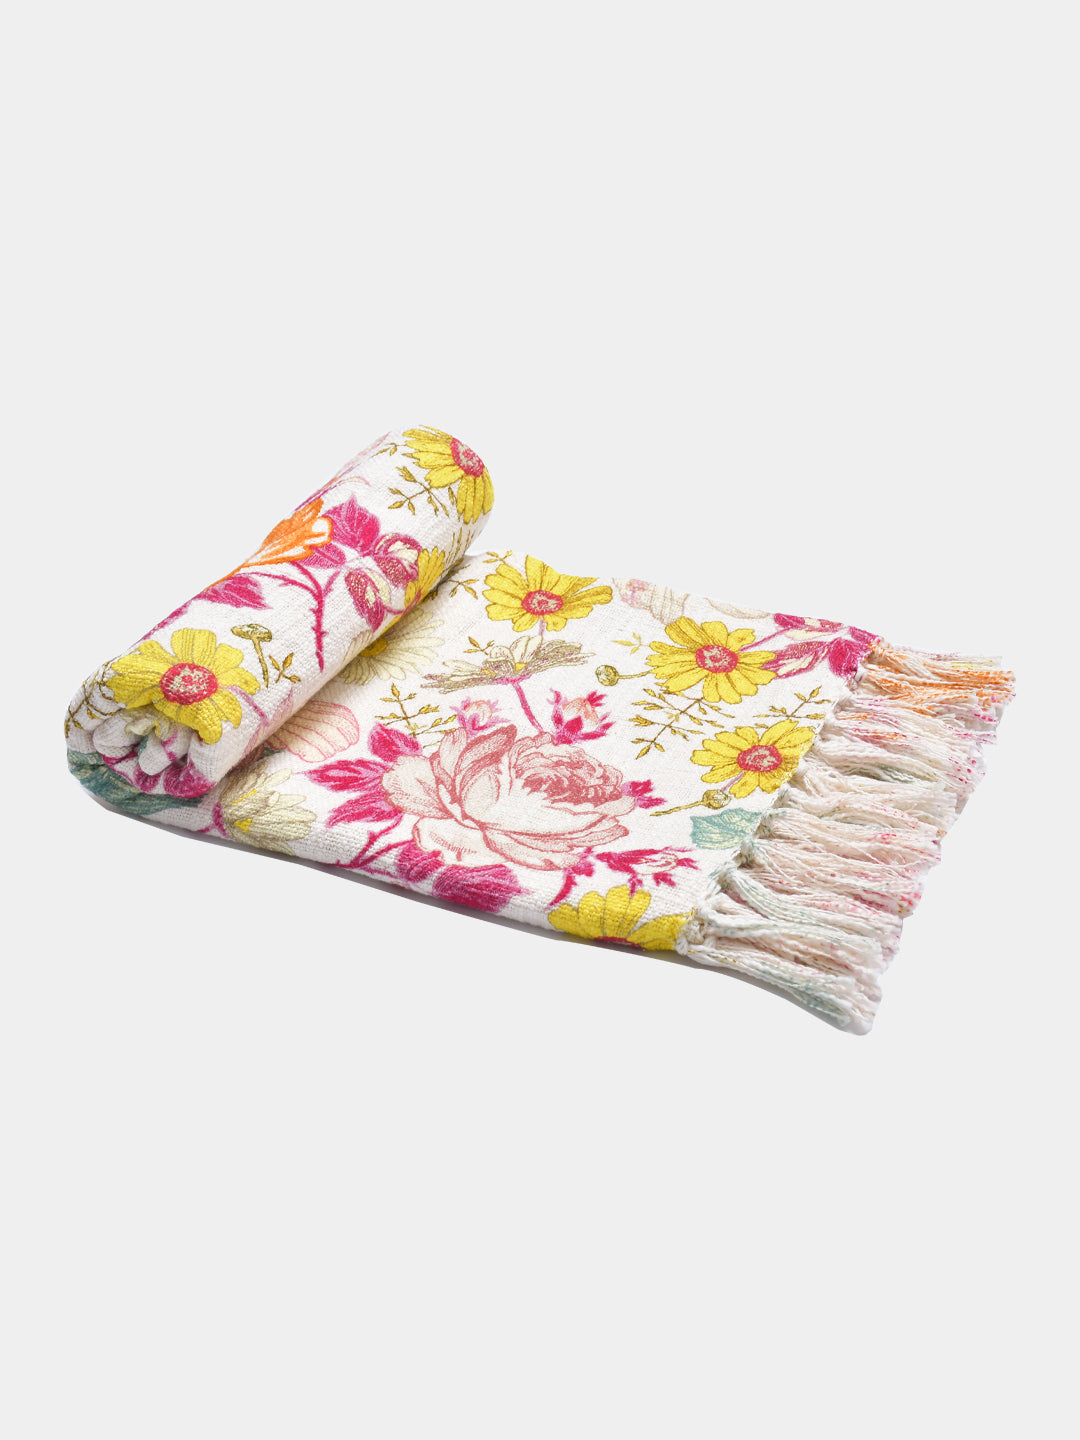 Blanc9 Floral Garden Cotton Printed Throw with Cushion Cover